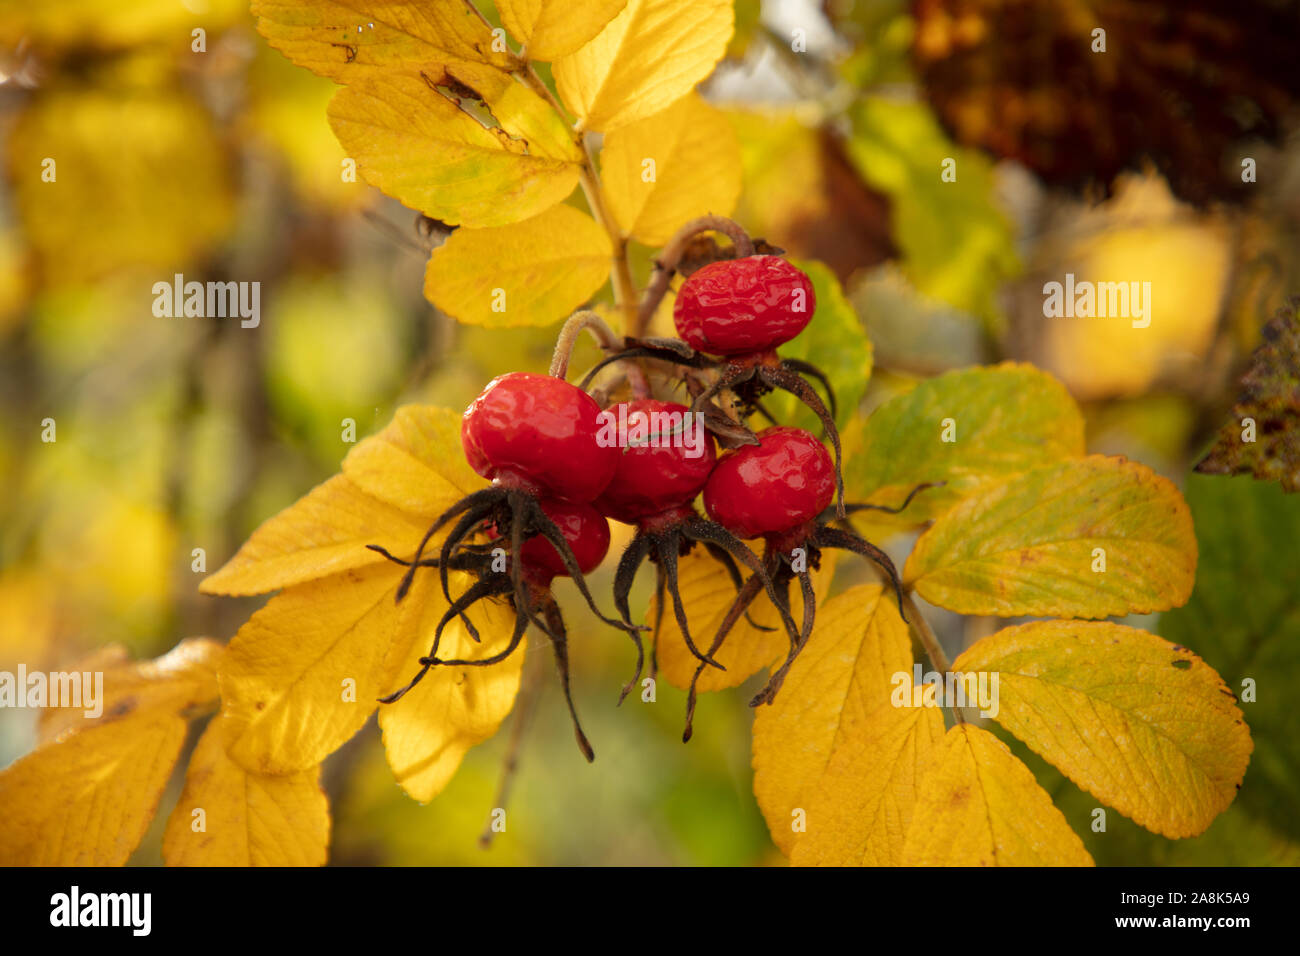 Red rose hips and yellow autumn leaves of Rosa rugosa or Japanese Rose seen in a hedge on a day in November. Stock Photo